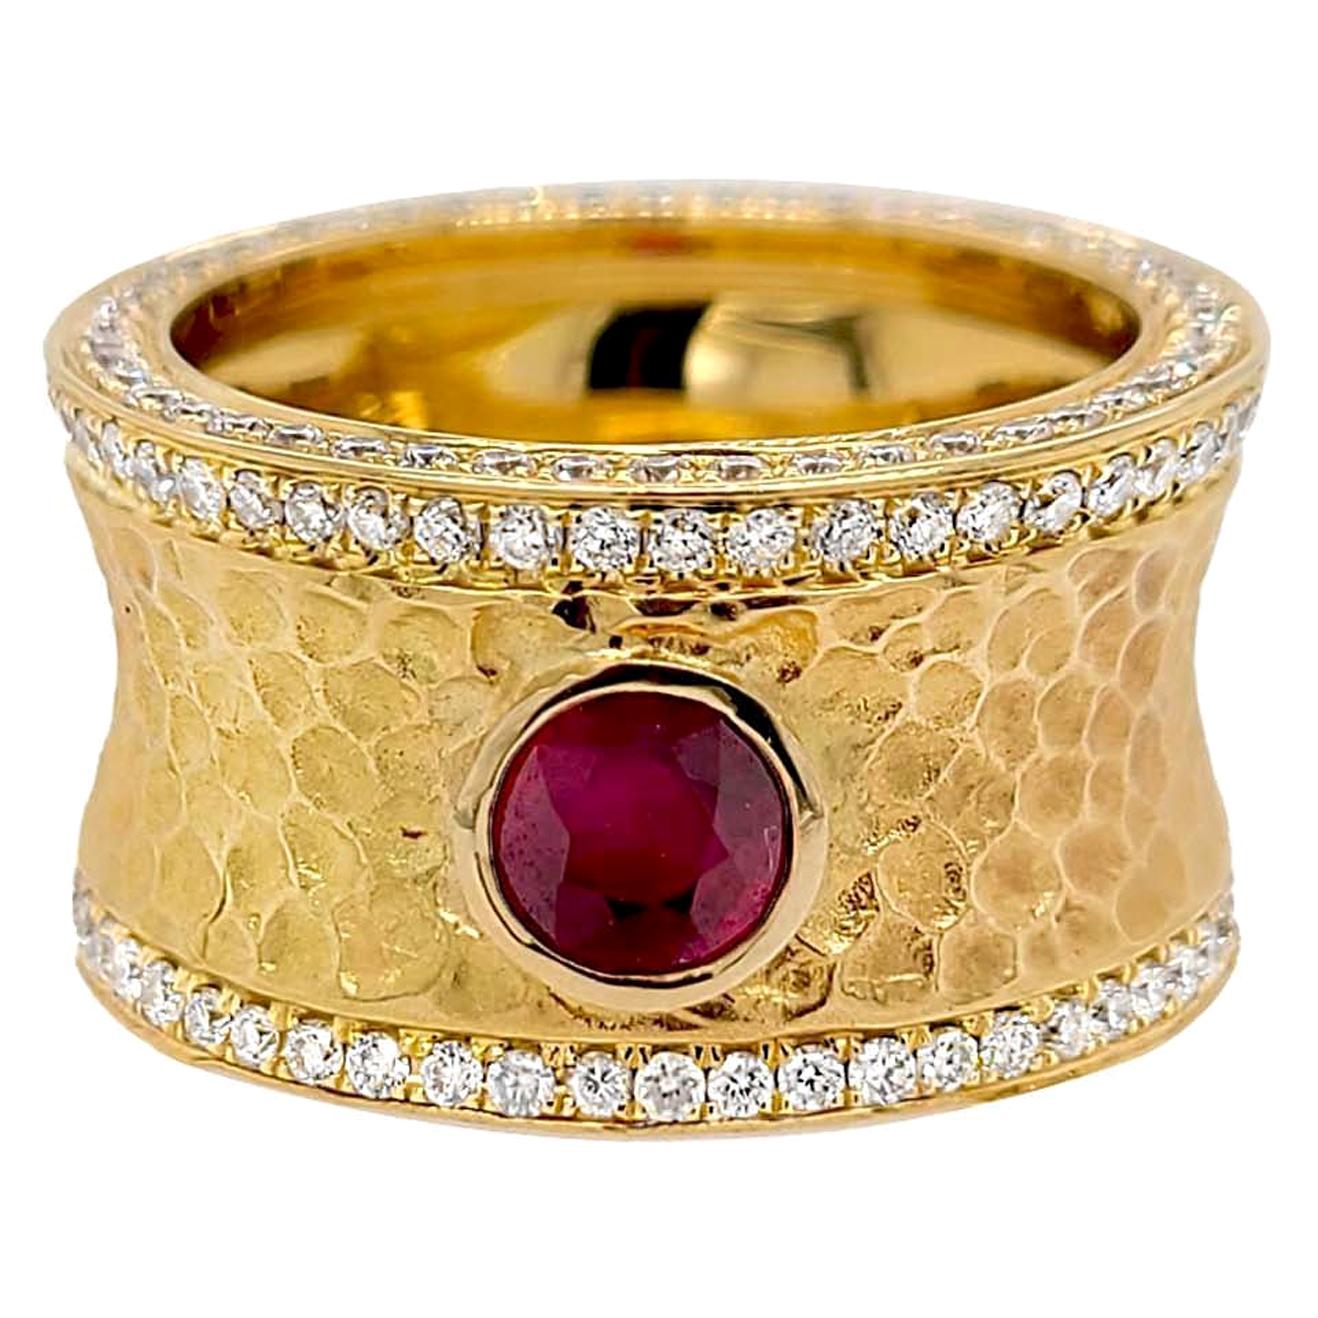 Hammer Finish Two-Tone 18 Karat Italian Diamond Ring with Ruby Center Stone For Sale